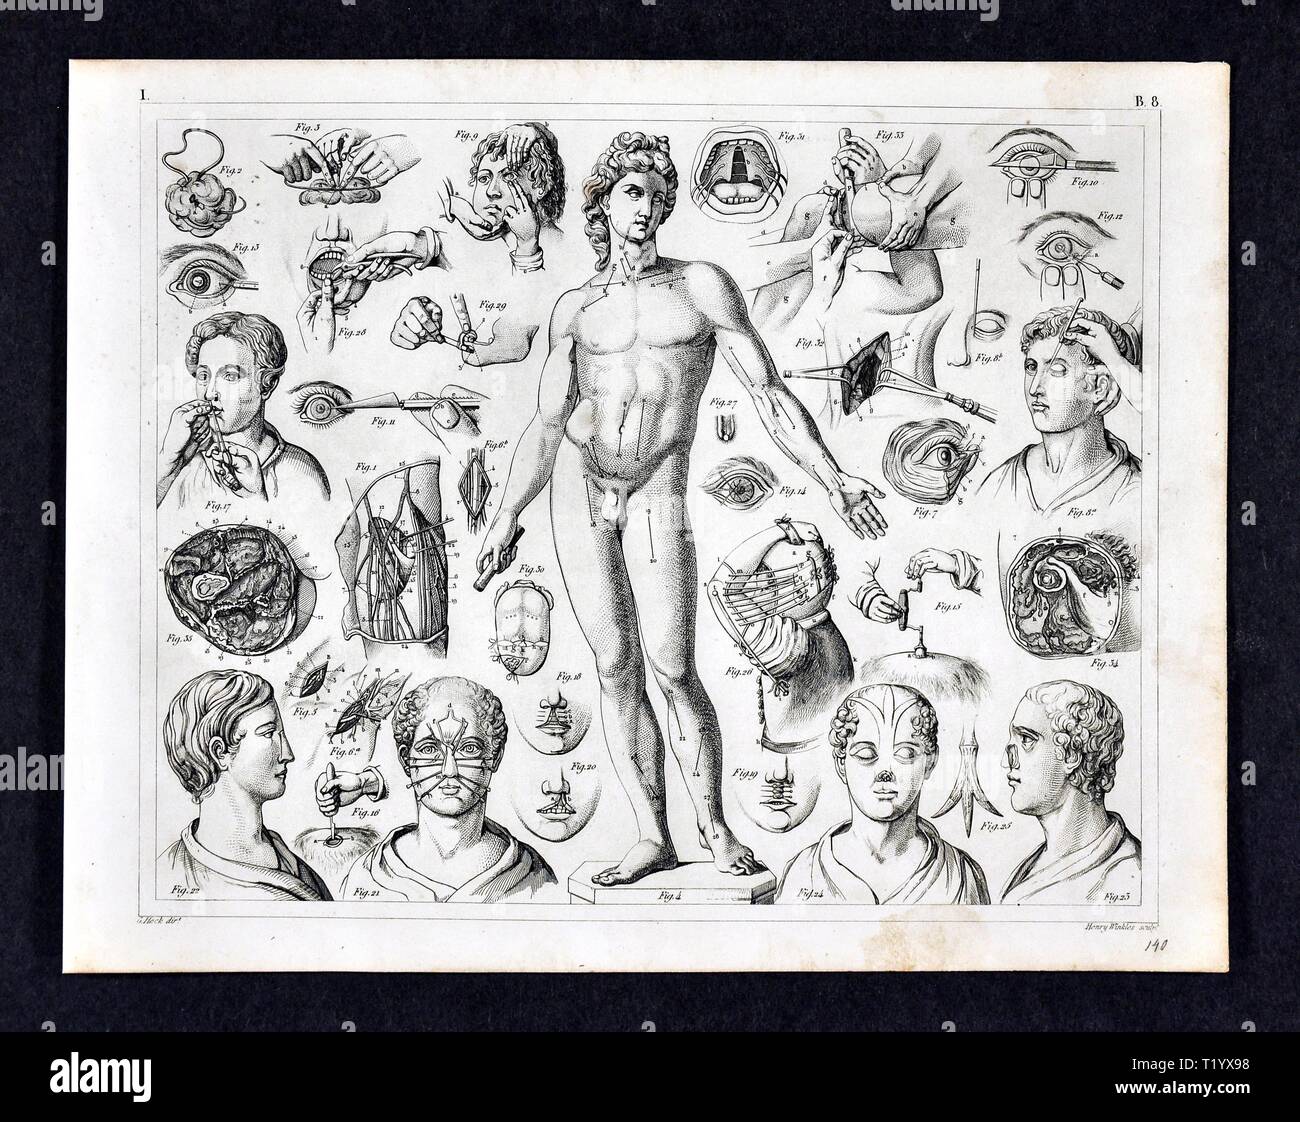 1849 Medical Illustration of various 19th century Surgical Techniques and Procedures Stock Photo